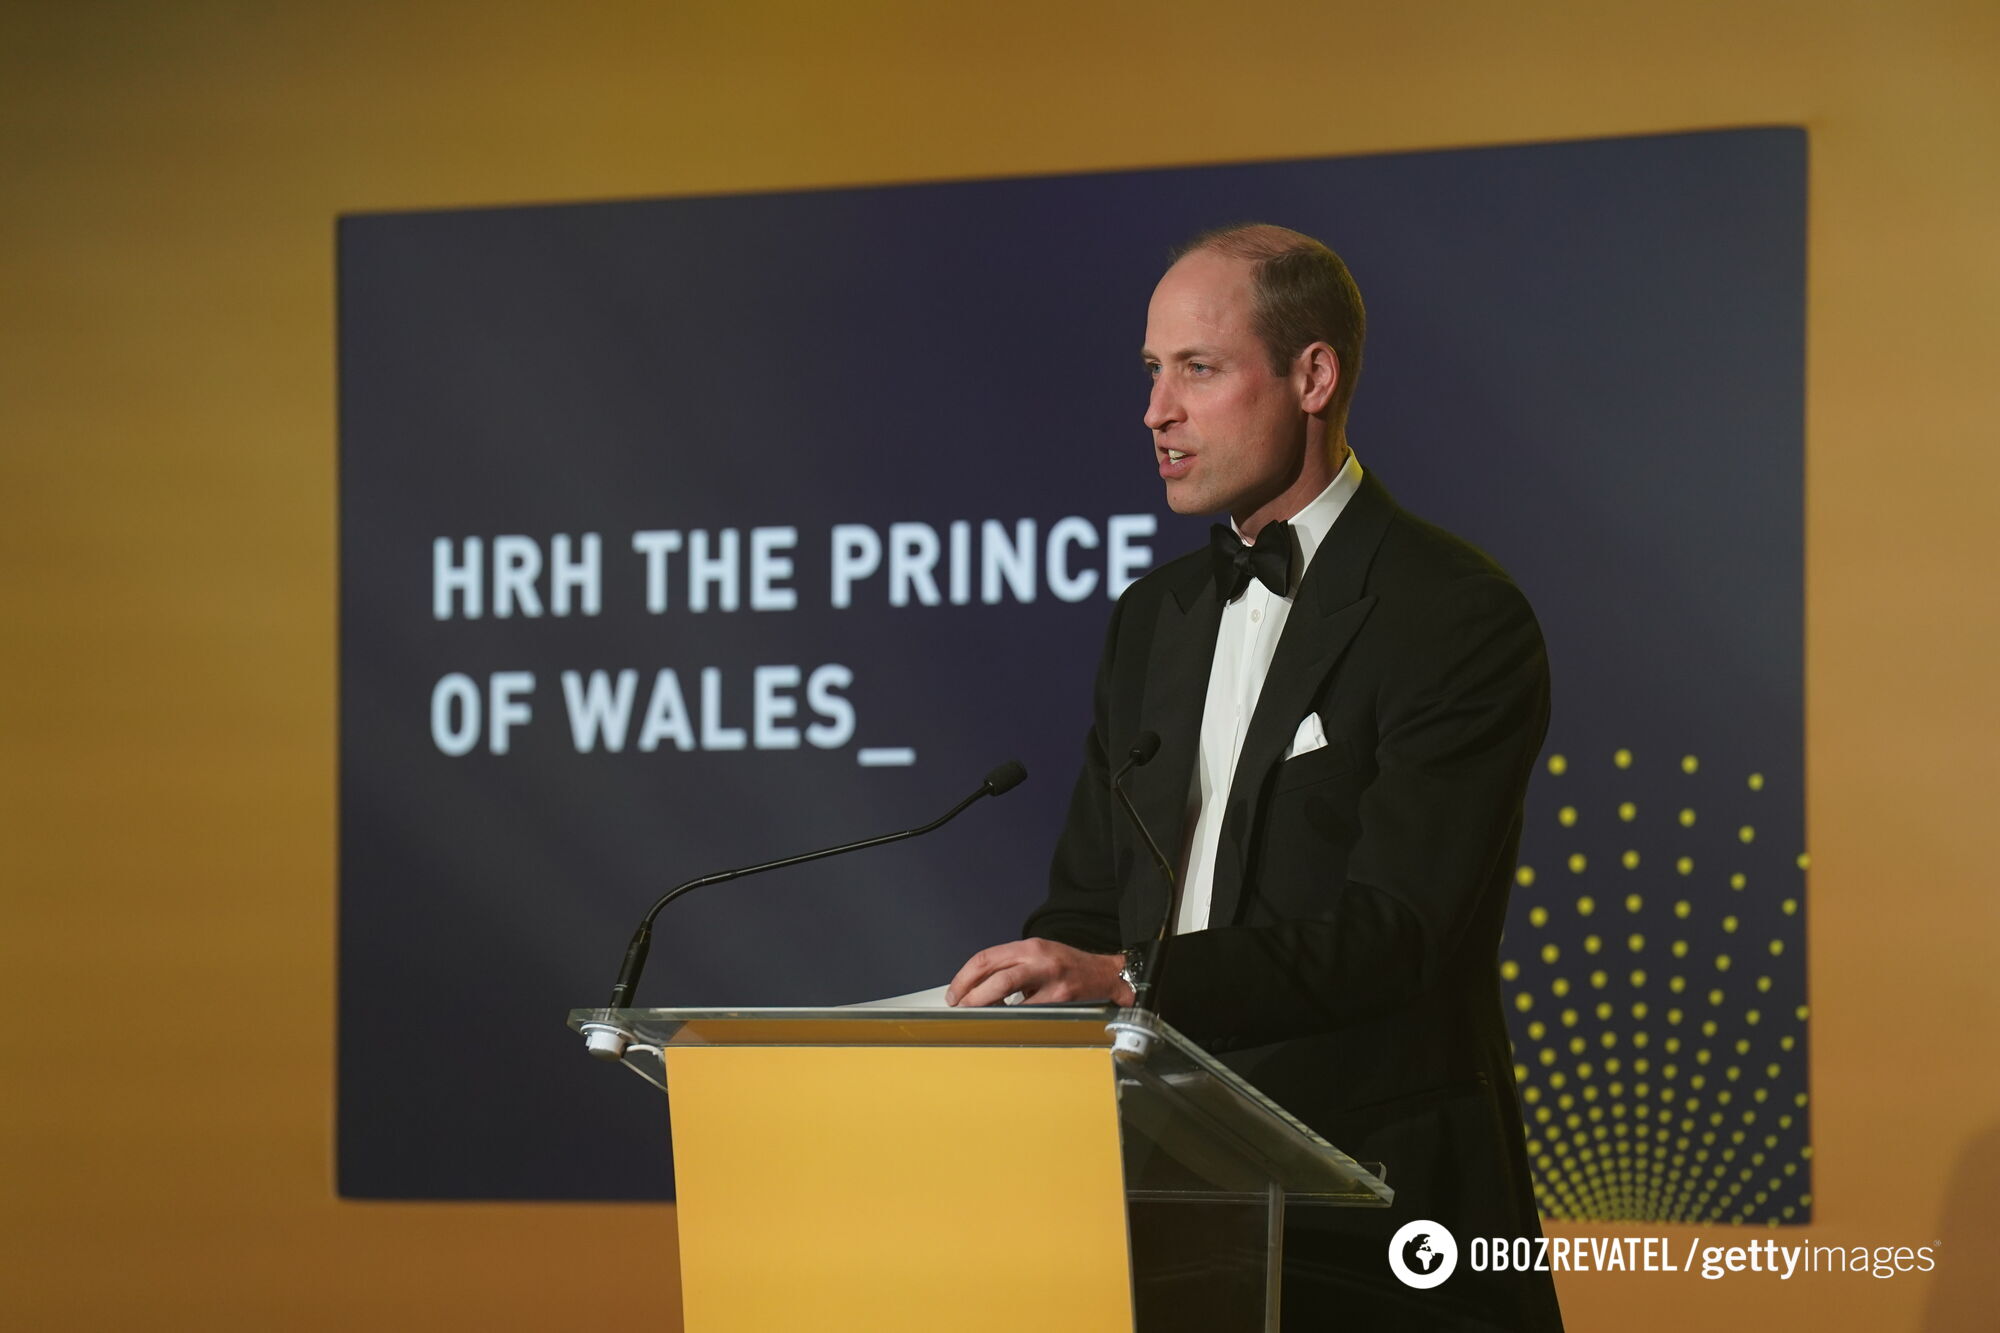 Are you a rock music fan? Prince William reveals favorite track of 10-year-old son George and amazed the audience